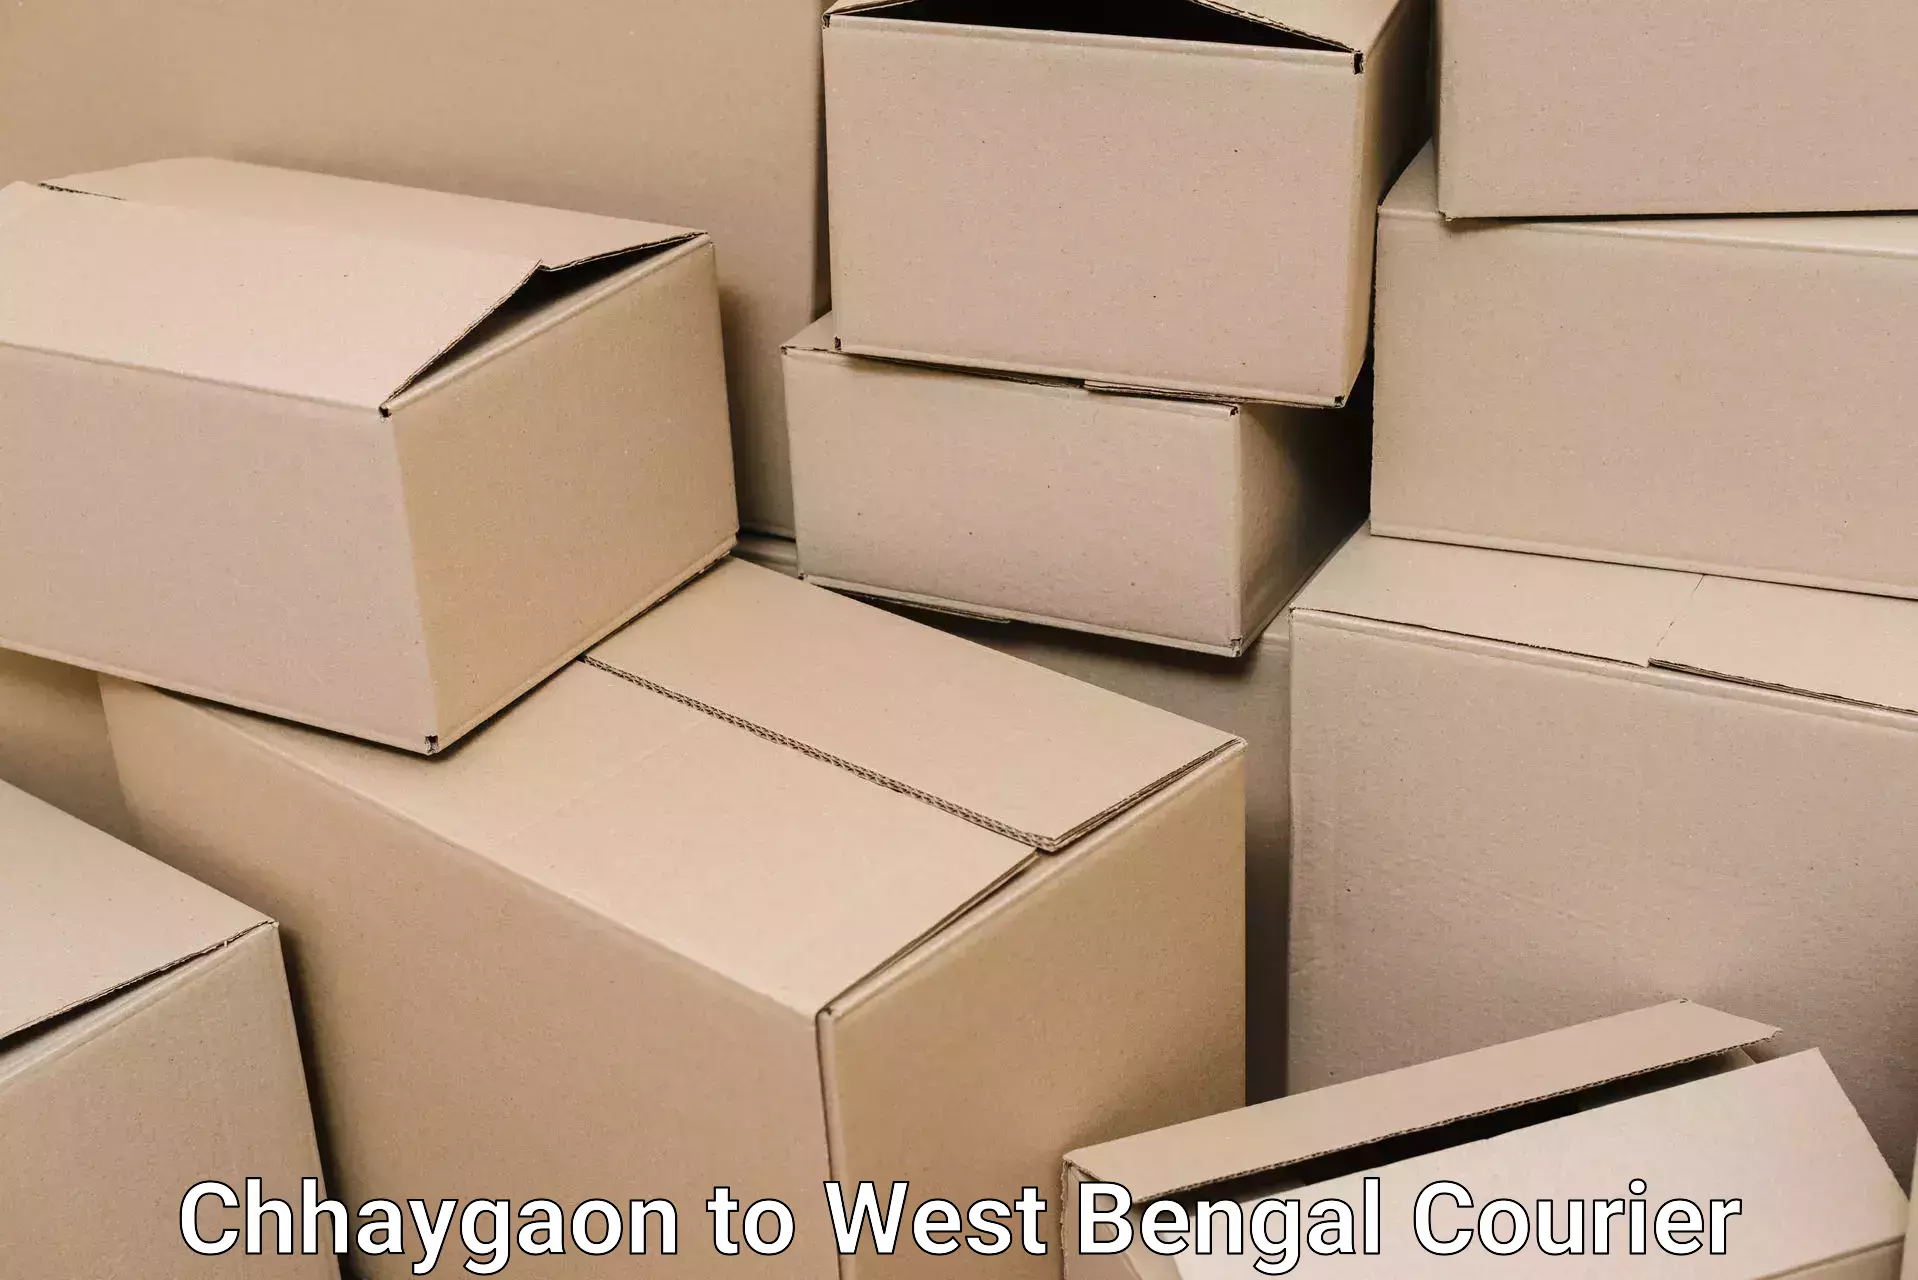 Furniture moving specialists Chhaygaon to Algarah